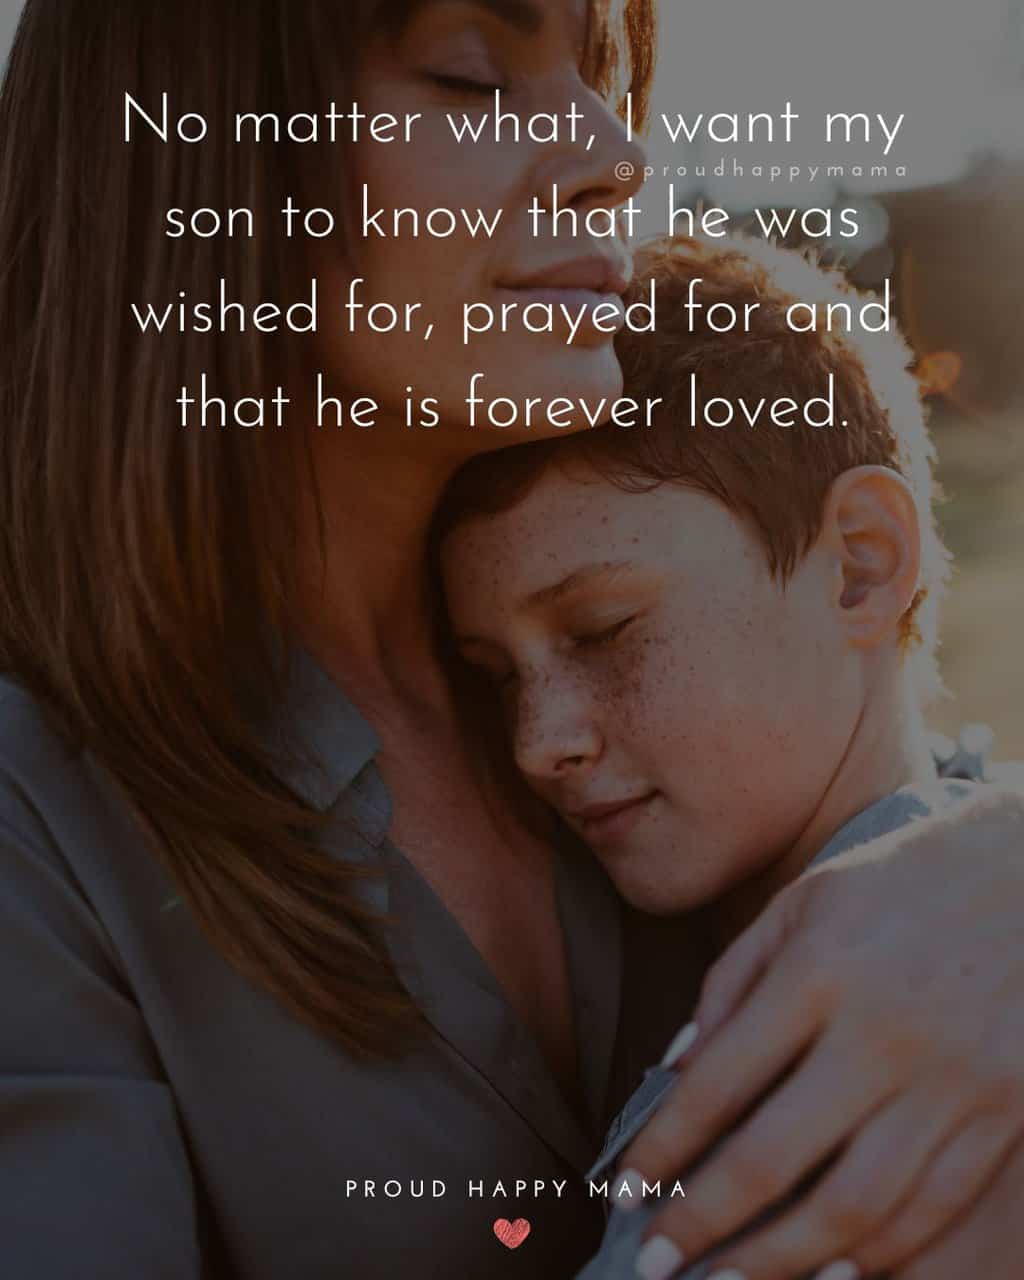 Mother hugging teenage son in sunlight with I love my son quote text overlay. ‘No matter what, I want my son to know that he was wished for, prayed for and that he is forever loved.’